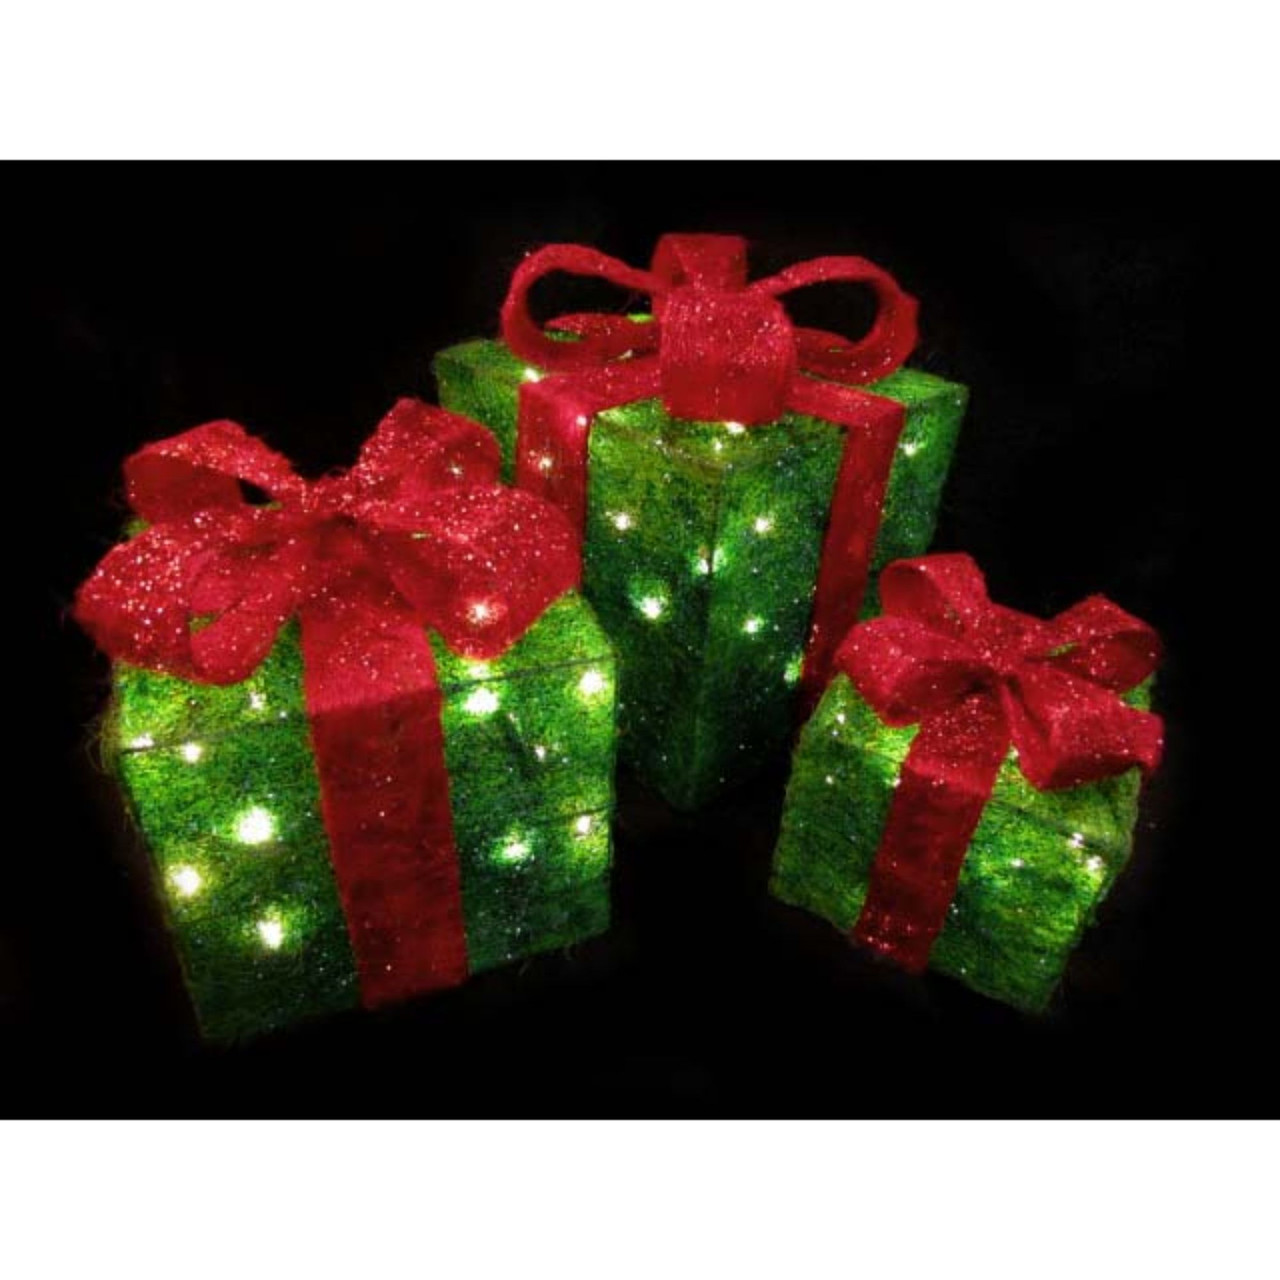 24 Light up Glowing Gift Bows, LED Bows for Gift Wrapping Gift